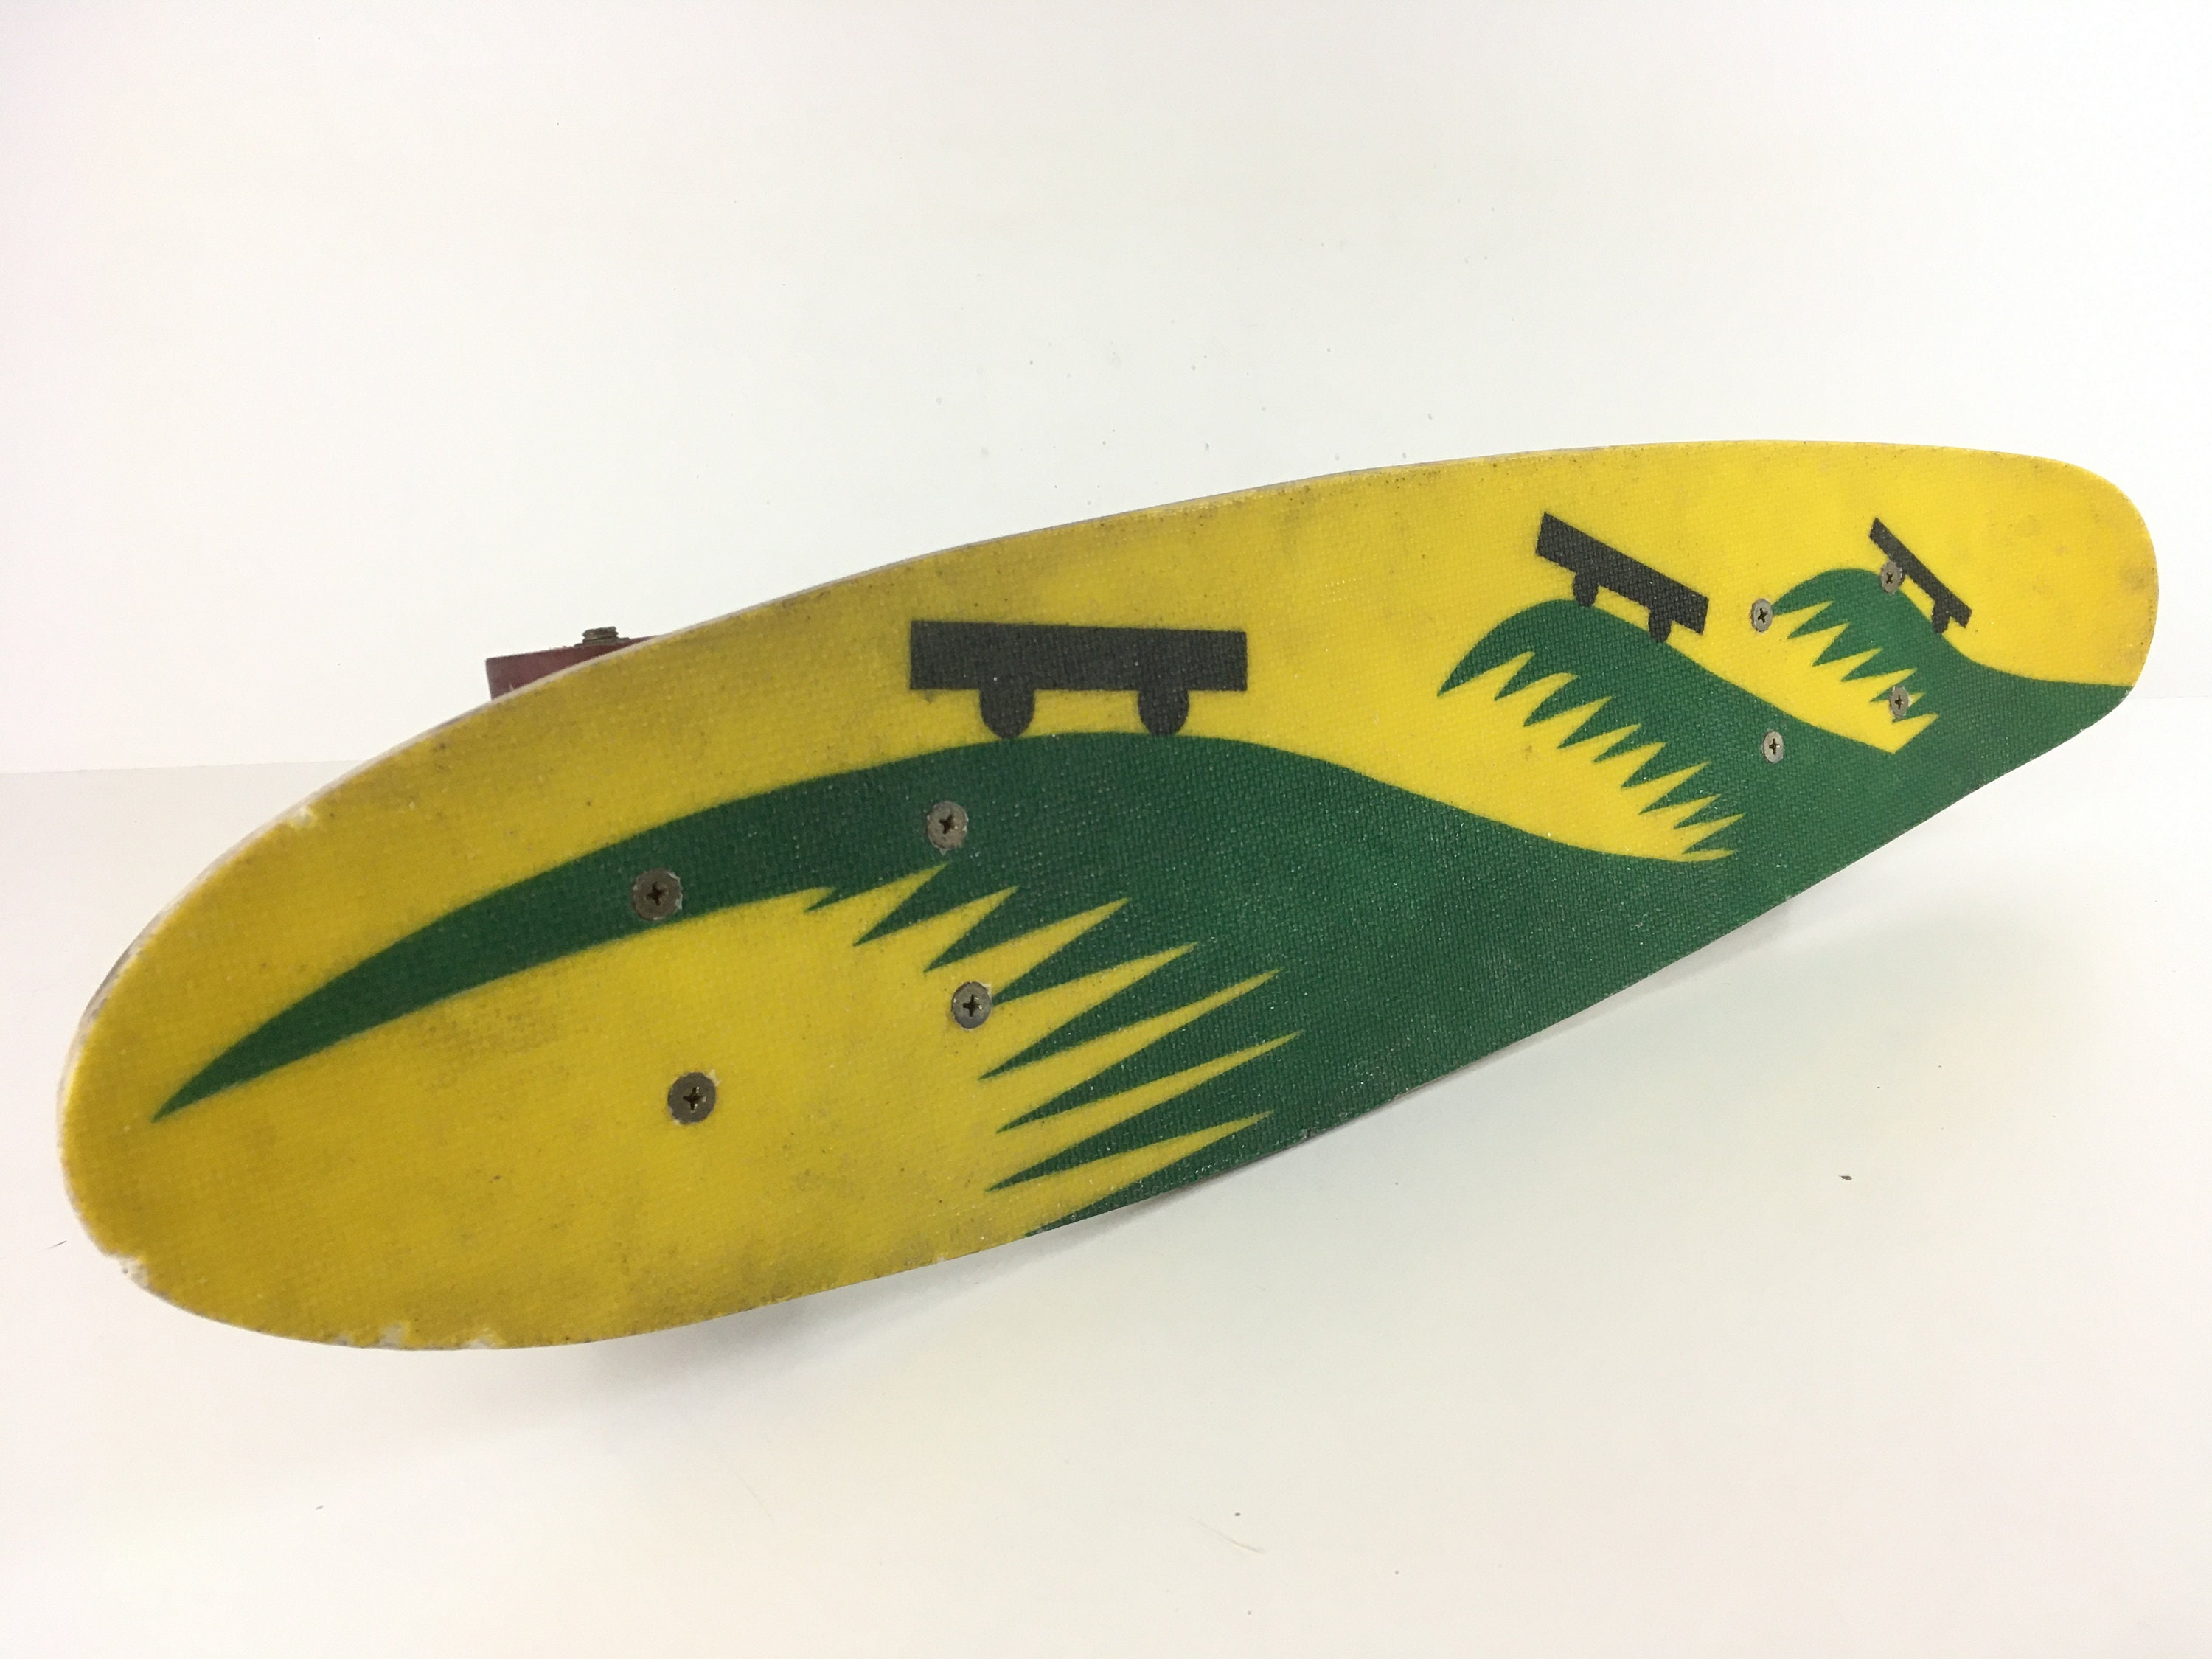 80s Skateboard Pro90 Enduro Colorful Graphics, Vintage with Green Wheels  and Green Trim, Great condition, 80s, 90s